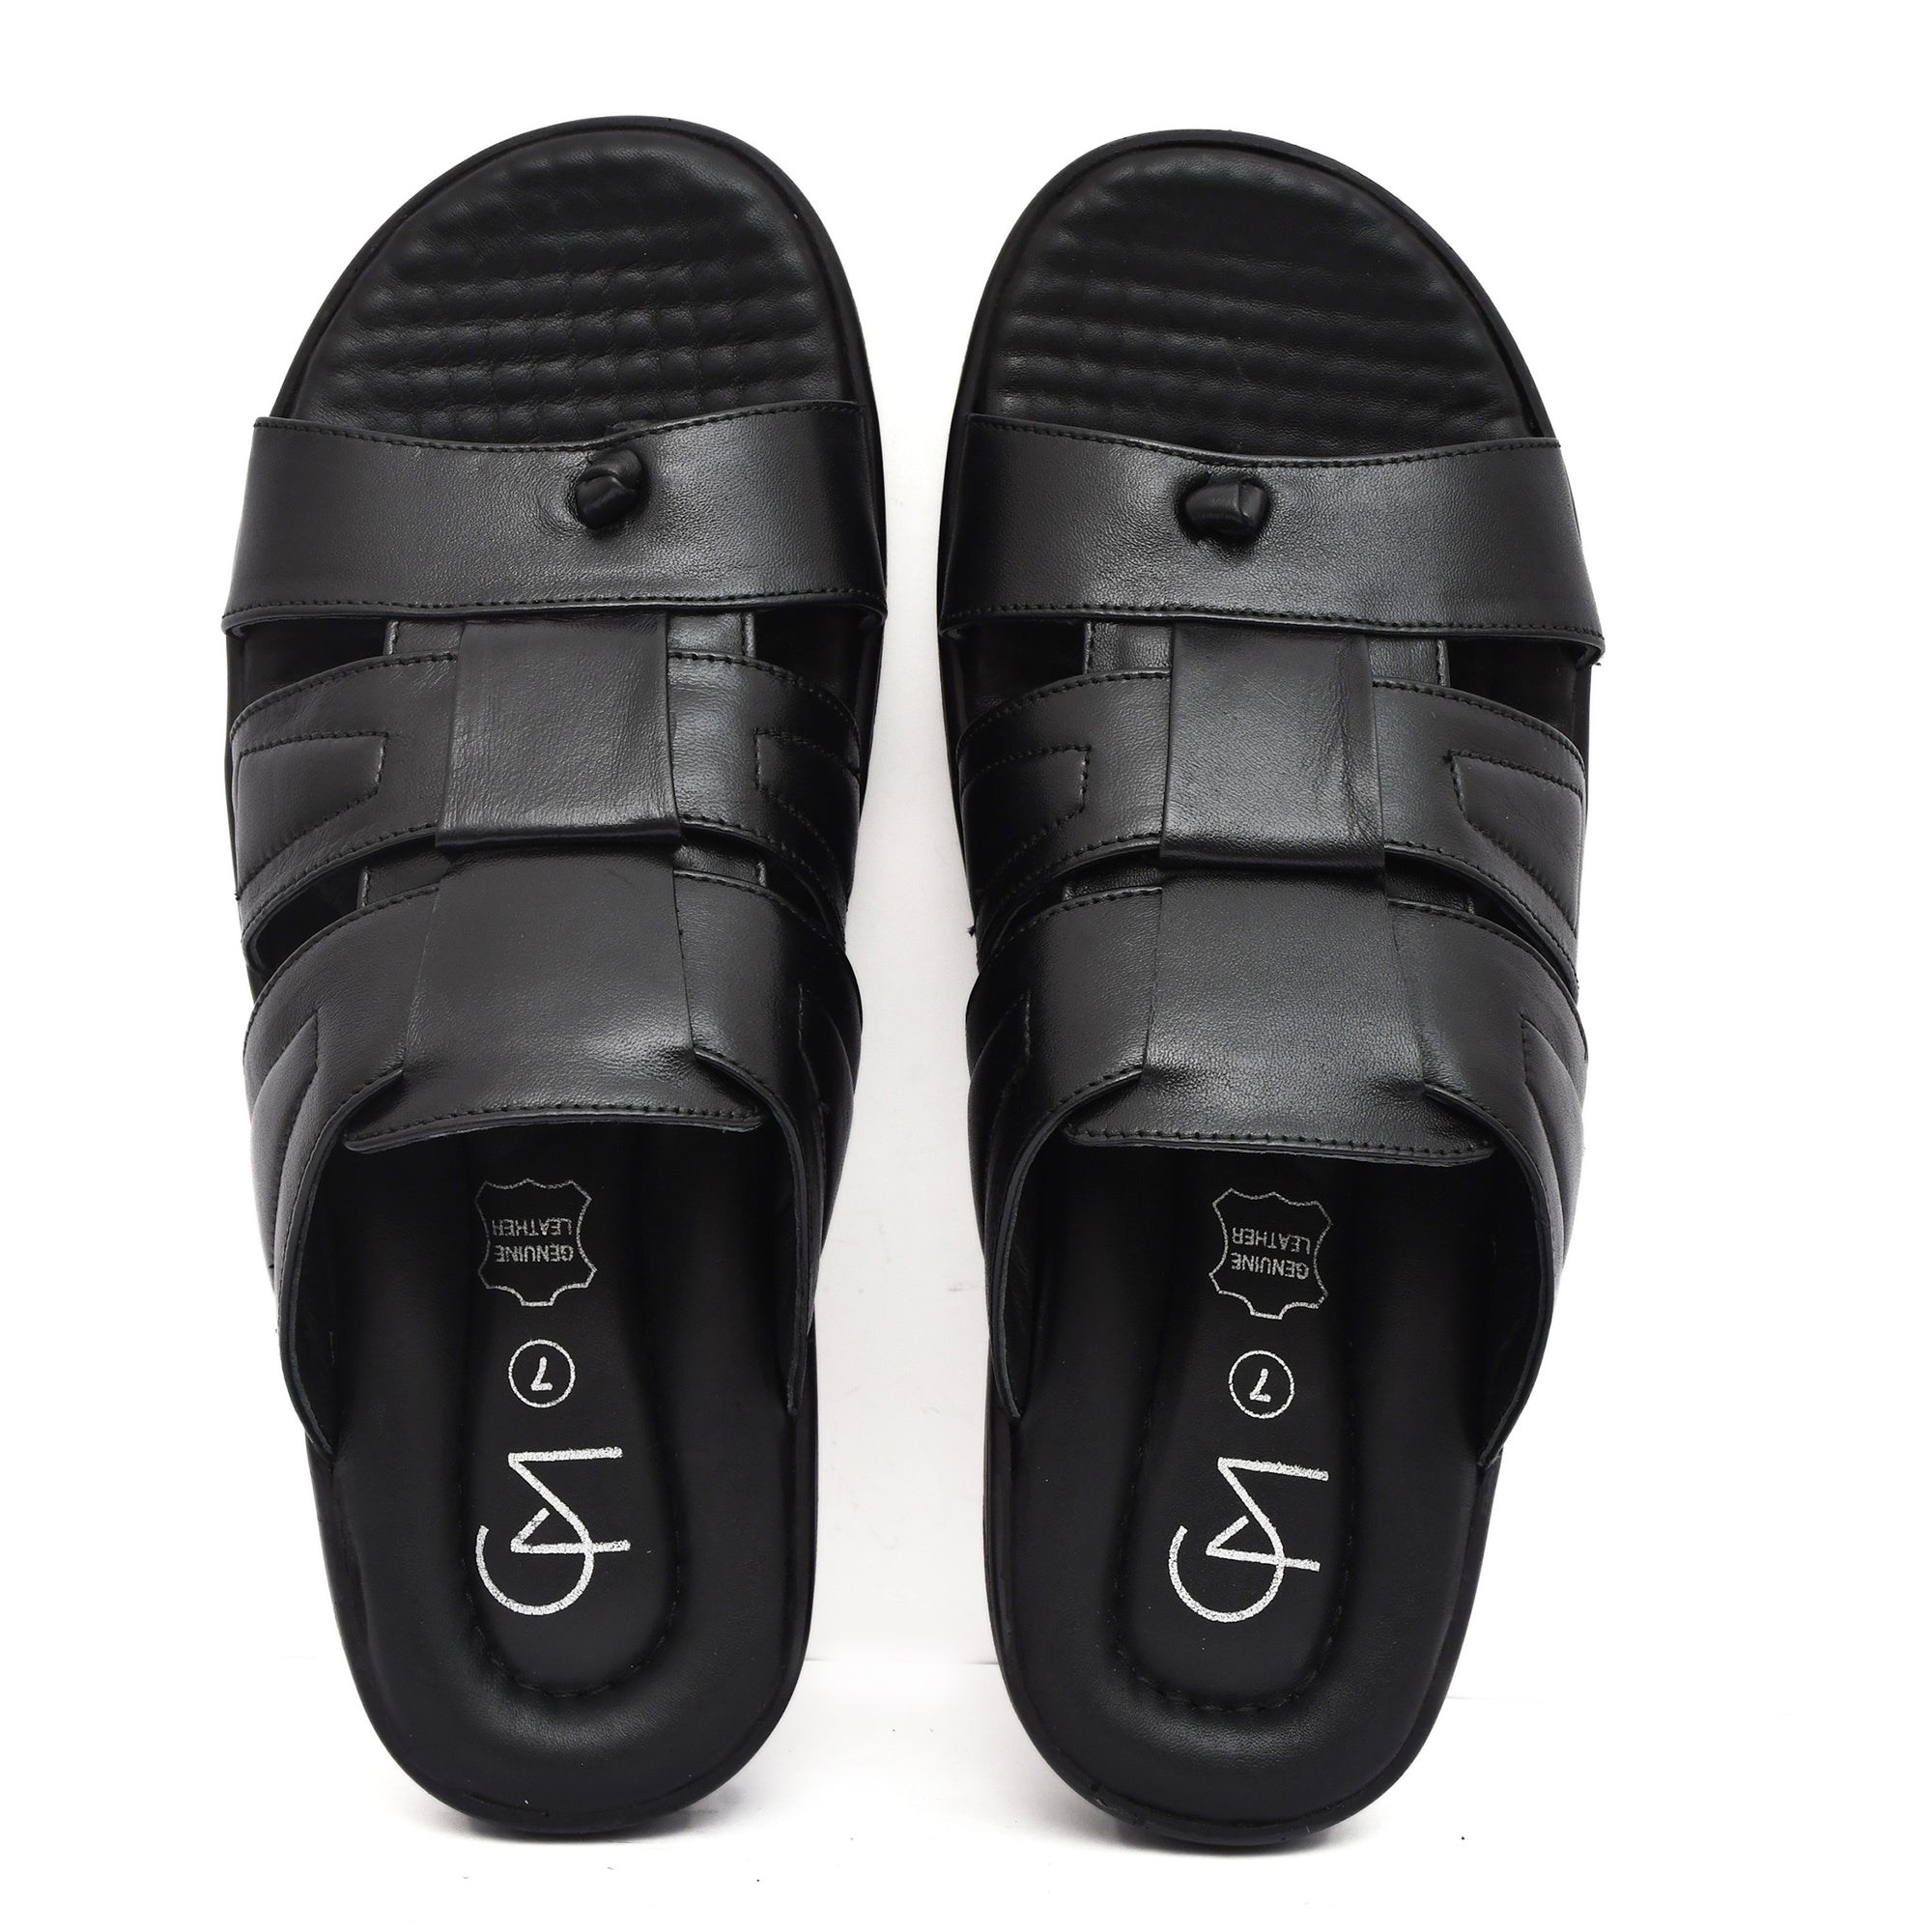 CM Leather slippers for men's countrymaddox